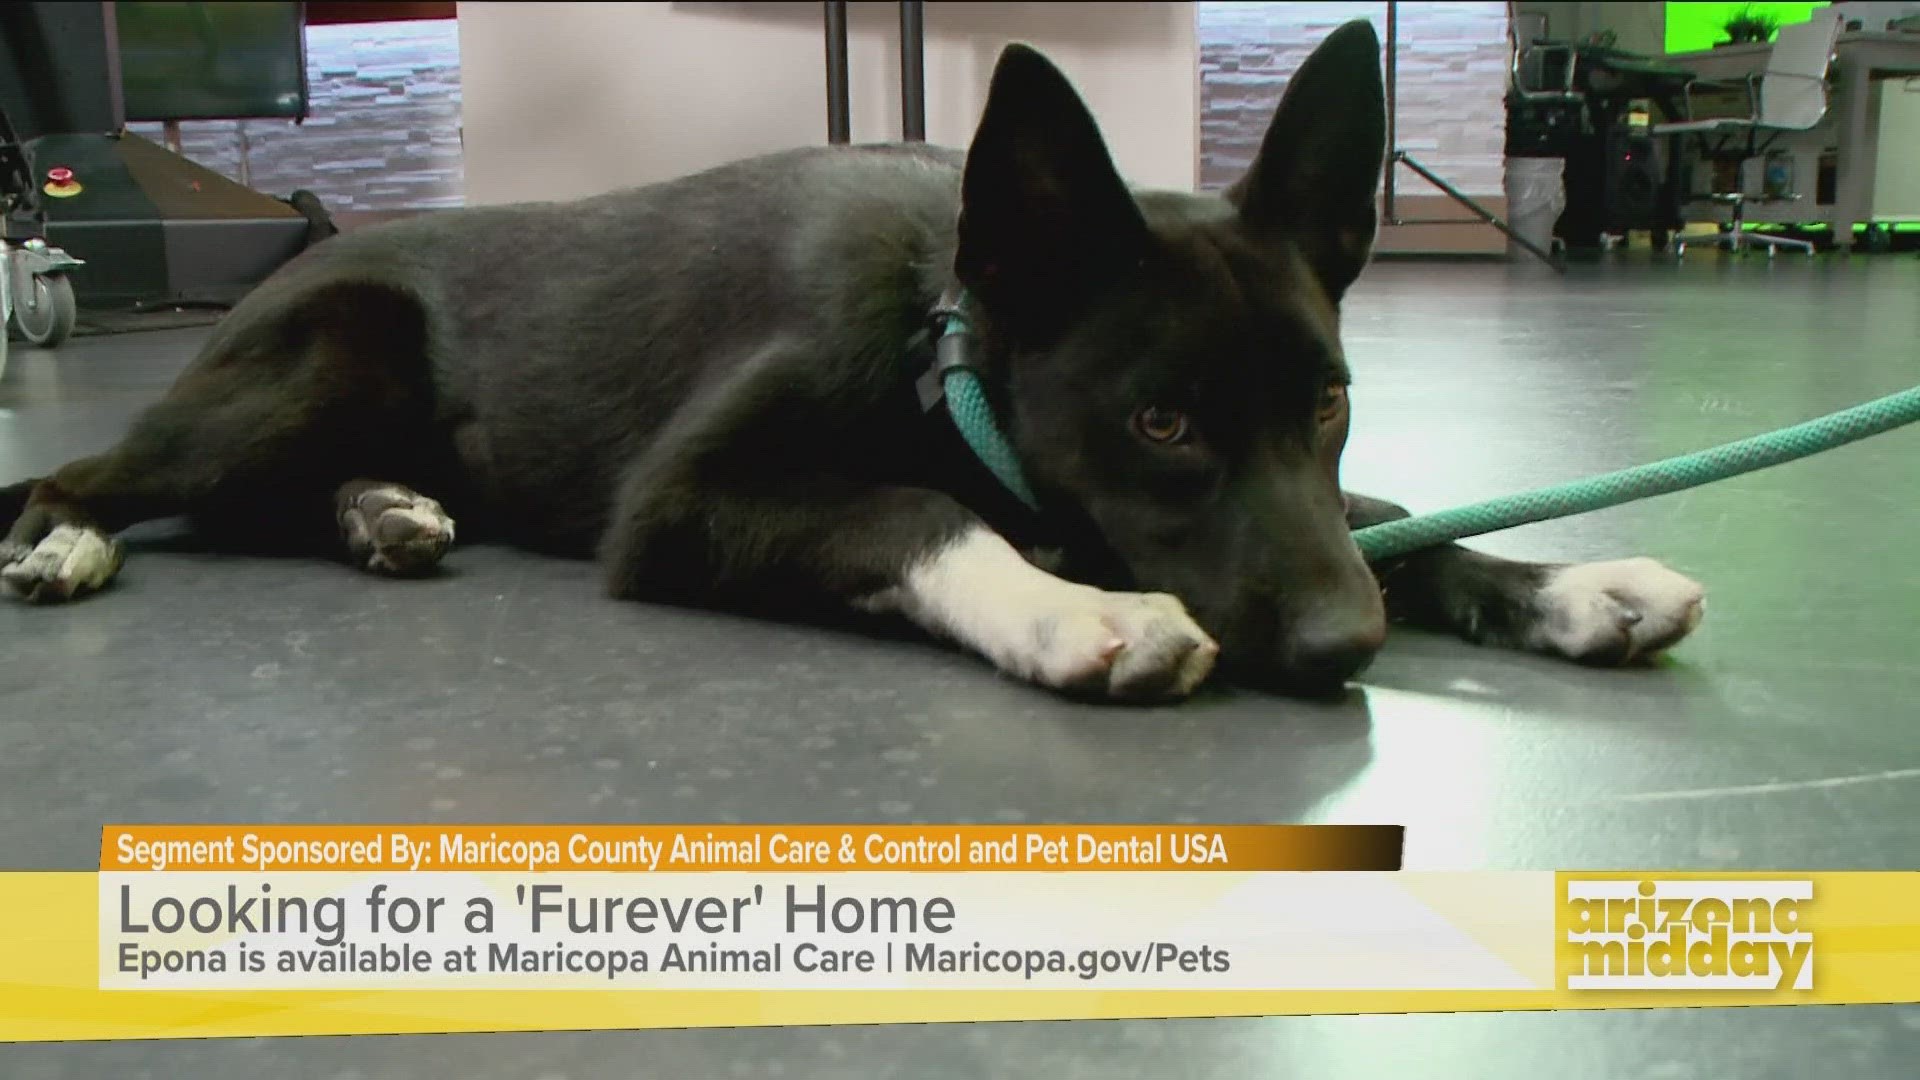 Meet Epona - a 5-month puppy ready for her furever home! We also check out this weekend's forecast with Krystle.